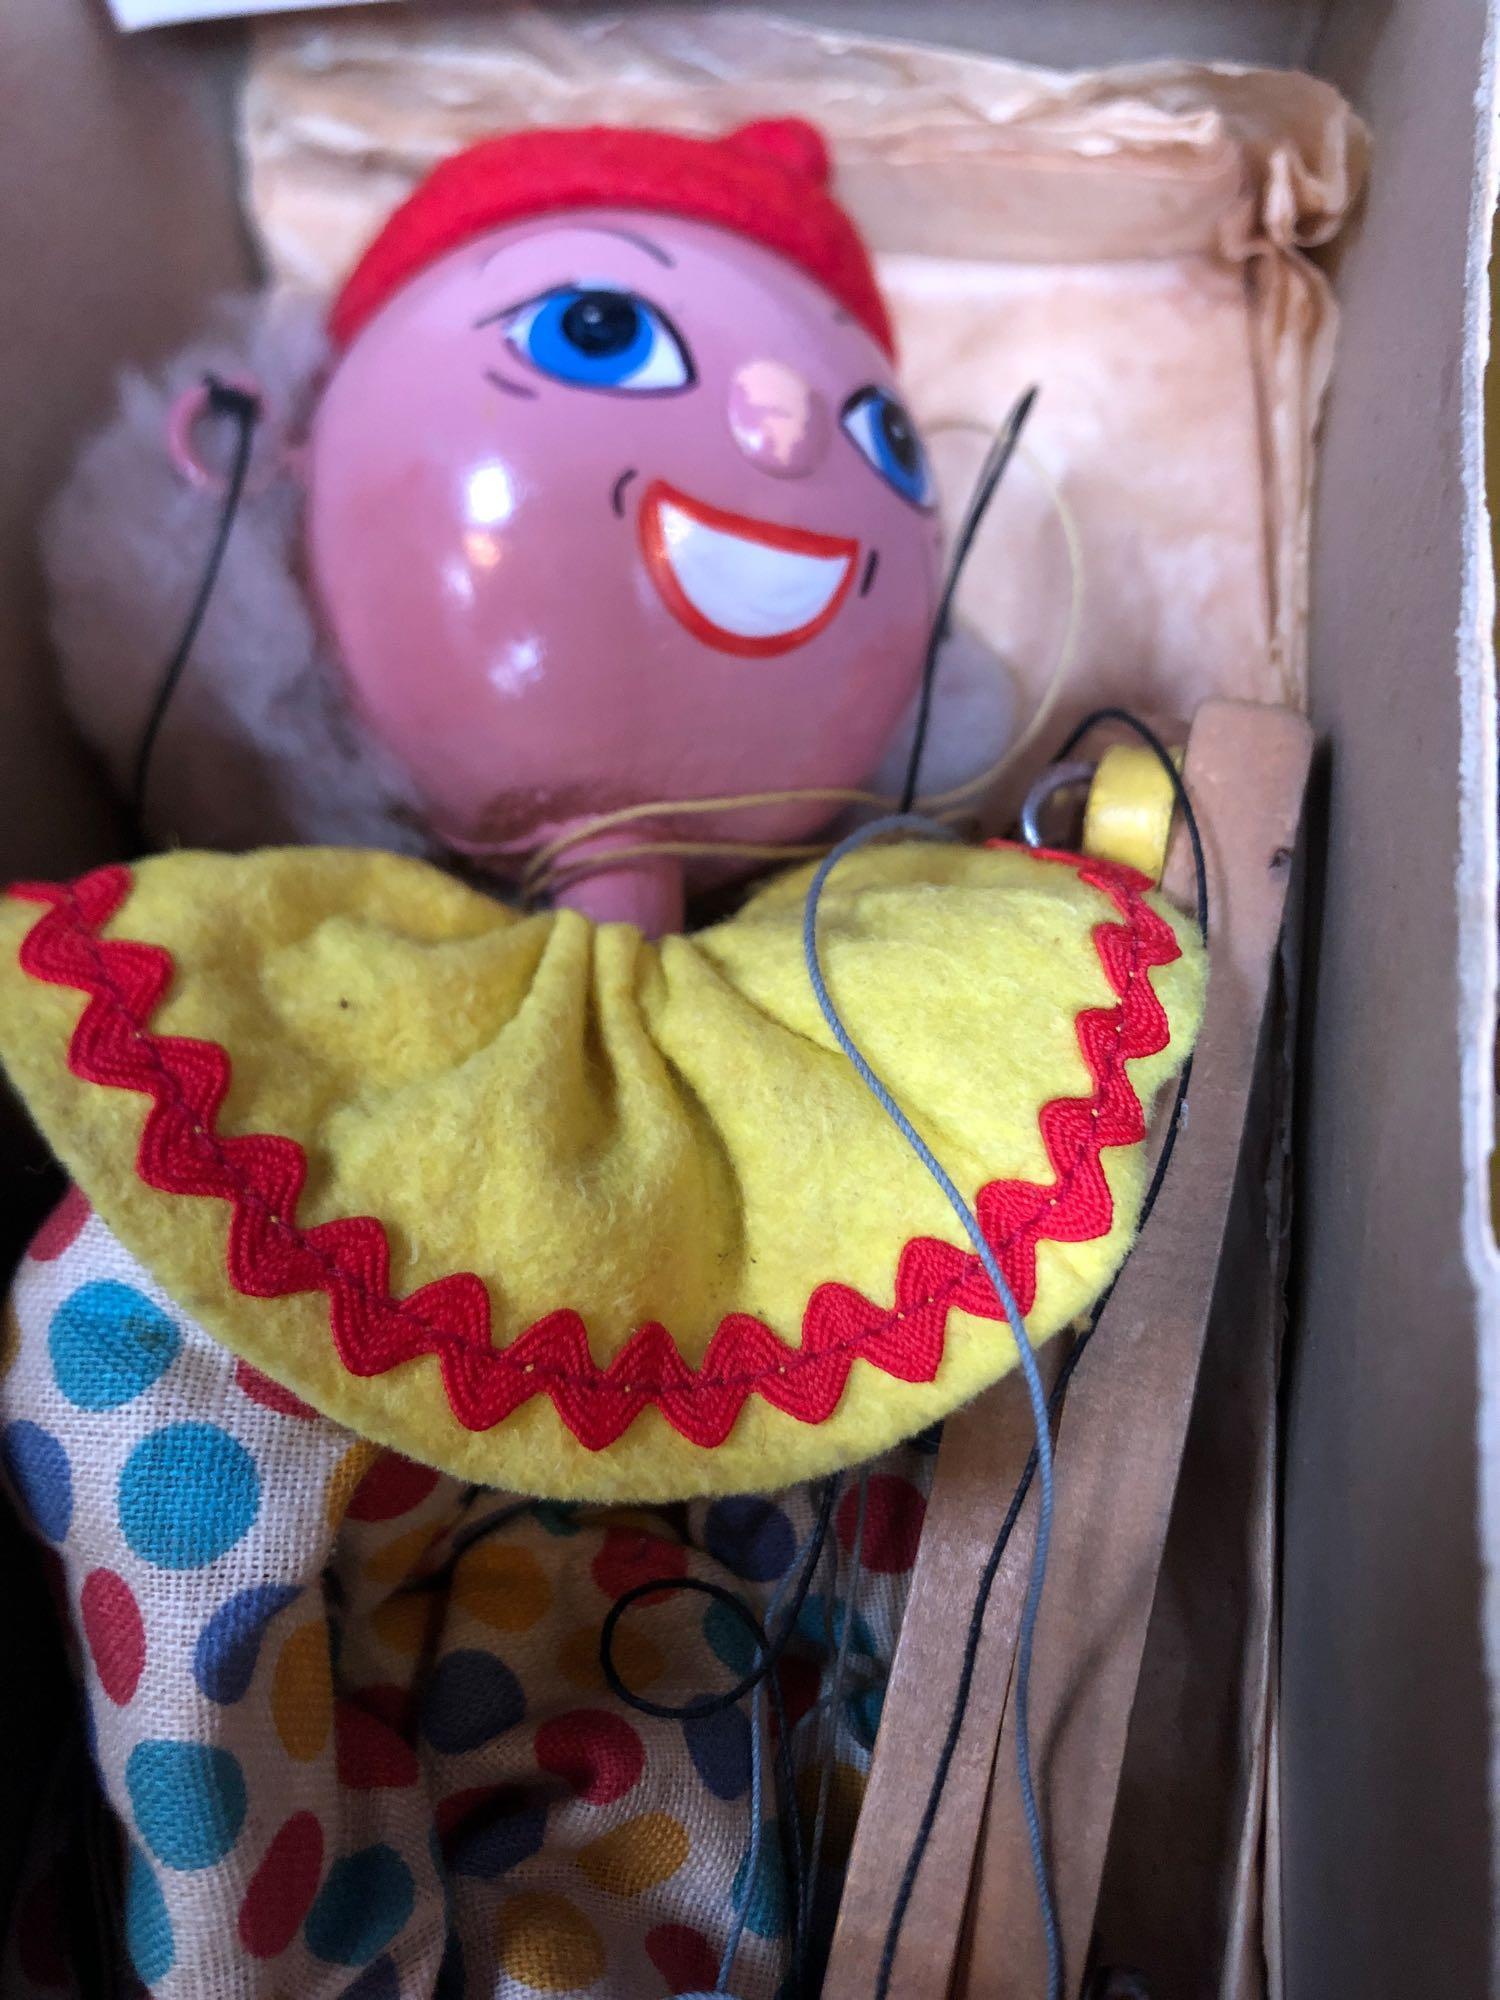 Vintage Pelham Puppets Marionette Clown In A Box - Image 2 of 2